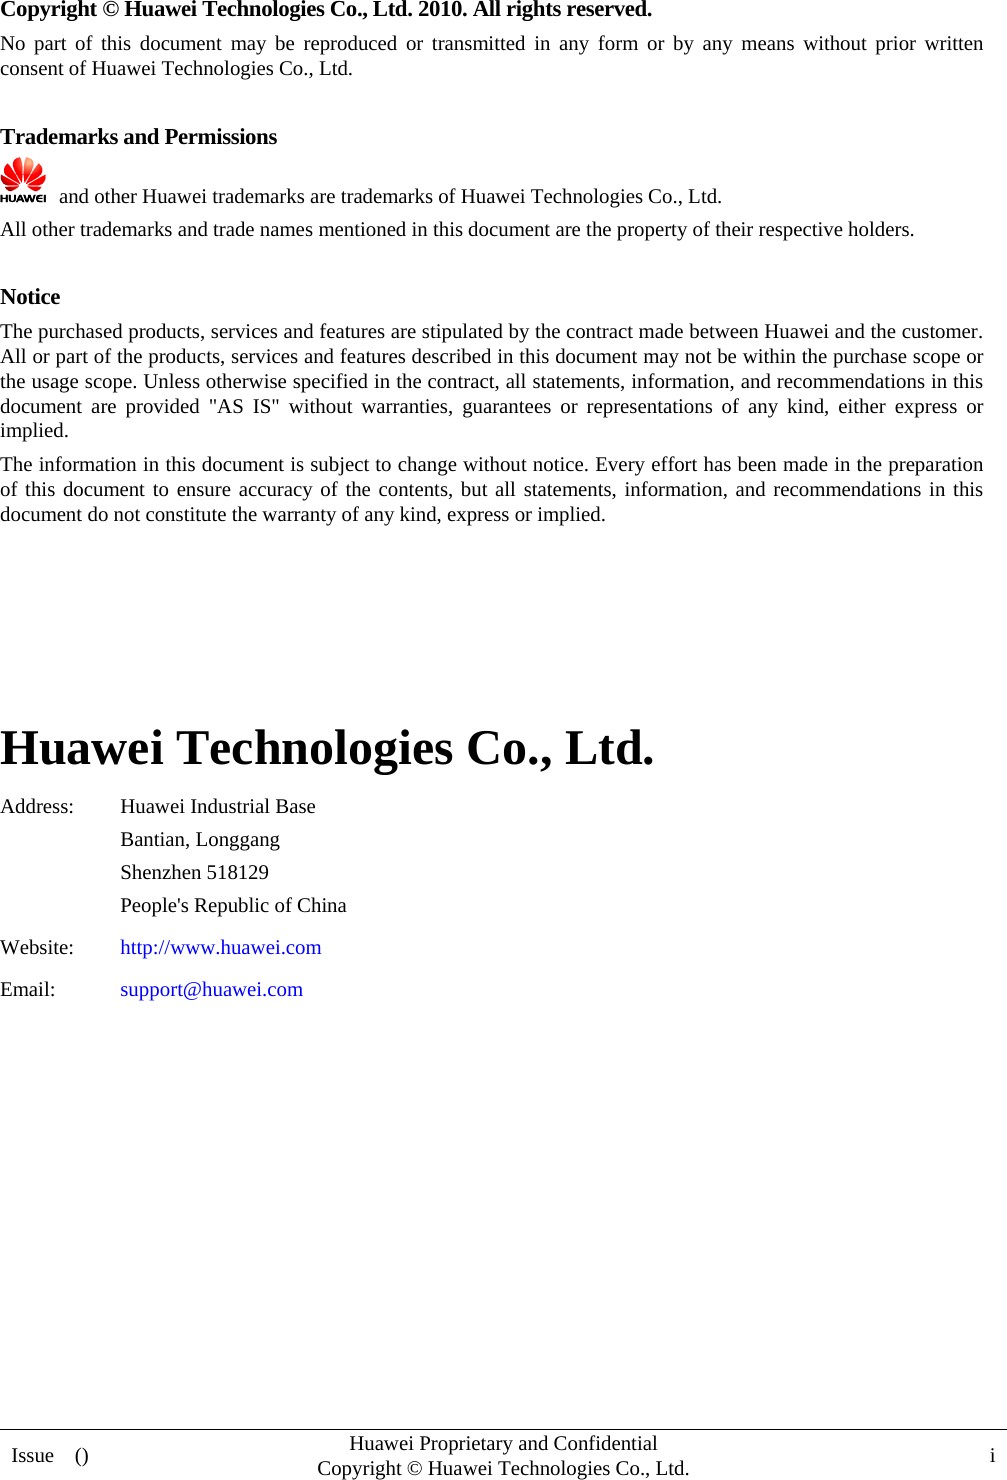  Issue  ()  Huawei Proprietary and Confidential         Copyright © Huawei Technologies Co., Ltd. i  Copyright © Huawei Technologies Co., Ltd. 2010. All rights reserved. No part of this document may be reproduced or transmitted in any form or by any means without prior written consent of Huawei Technologies Co., Ltd.  Trademarks and Permissions   and other Huawei trademarks are trademarks of Huawei Technologies Co., Ltd. All other trademarks and trade names mentioned in this document are the property of their respective holders.  Notice The purchased products, services and features are stipulated by the contract made between Huawei and the customer. All or part of the products, services and features described in this document may not be within the purchase scope or the usage scope. Unless otherwise specified in the contract, all statements, information, and recommendations in this document are provided &quot;AS IS&quot; without warranties, guarantees or representations of any kind, either express or implied. The information in this document is subject to change without notice. Every effort has been made in the preparation of this document to ensure accuracy of the contents, but all statements, information, and recommendations in this document do not constitute the warranty of any kind, express or implied.     Huawei Technologies Co., Ltd. Address: Huawei Industrial Base Bantian, Longgang Shenzhen 518129 People&apos;s Republic of China Website:  http://www.huawei.com Email:  support@huawei.com          